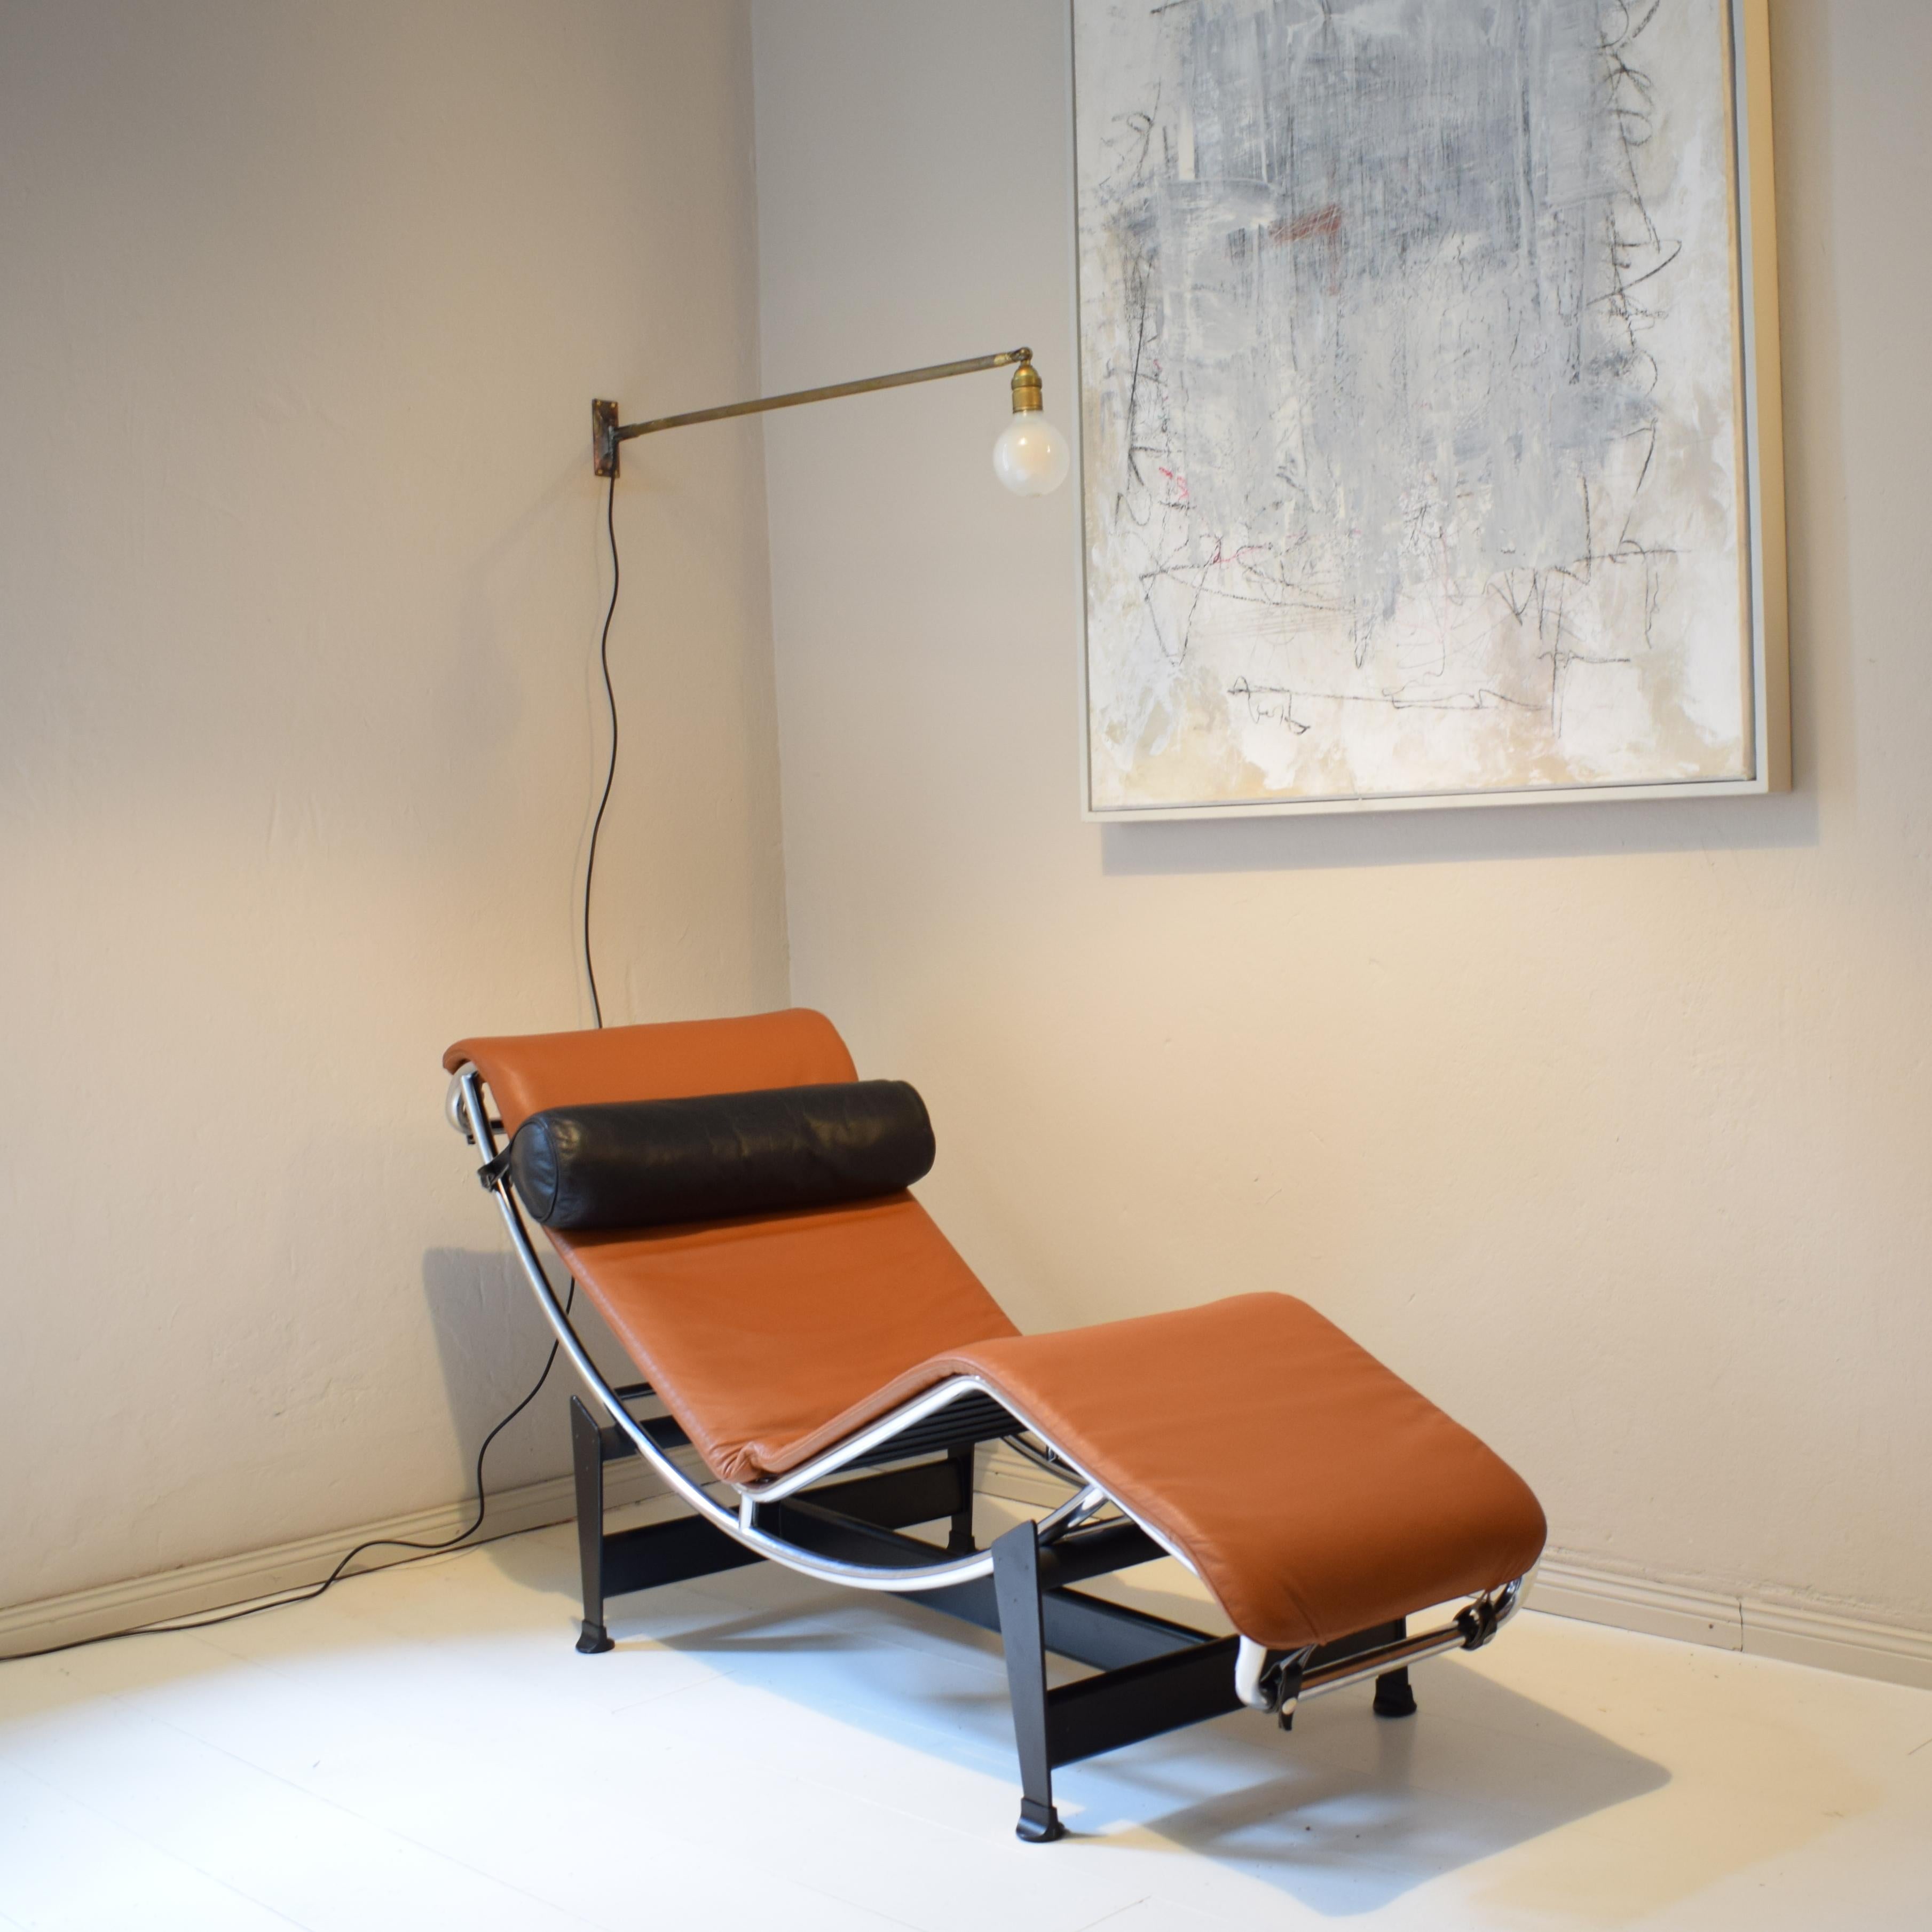 This timeless LC4 chaise Lounge in cognac and black leather by Charlotte Perriand and Le Corbusier was manufactured by Cassina in the 1990.
The cognac leather was redone but the original rose leather case is underneath.

A unique piece which is a